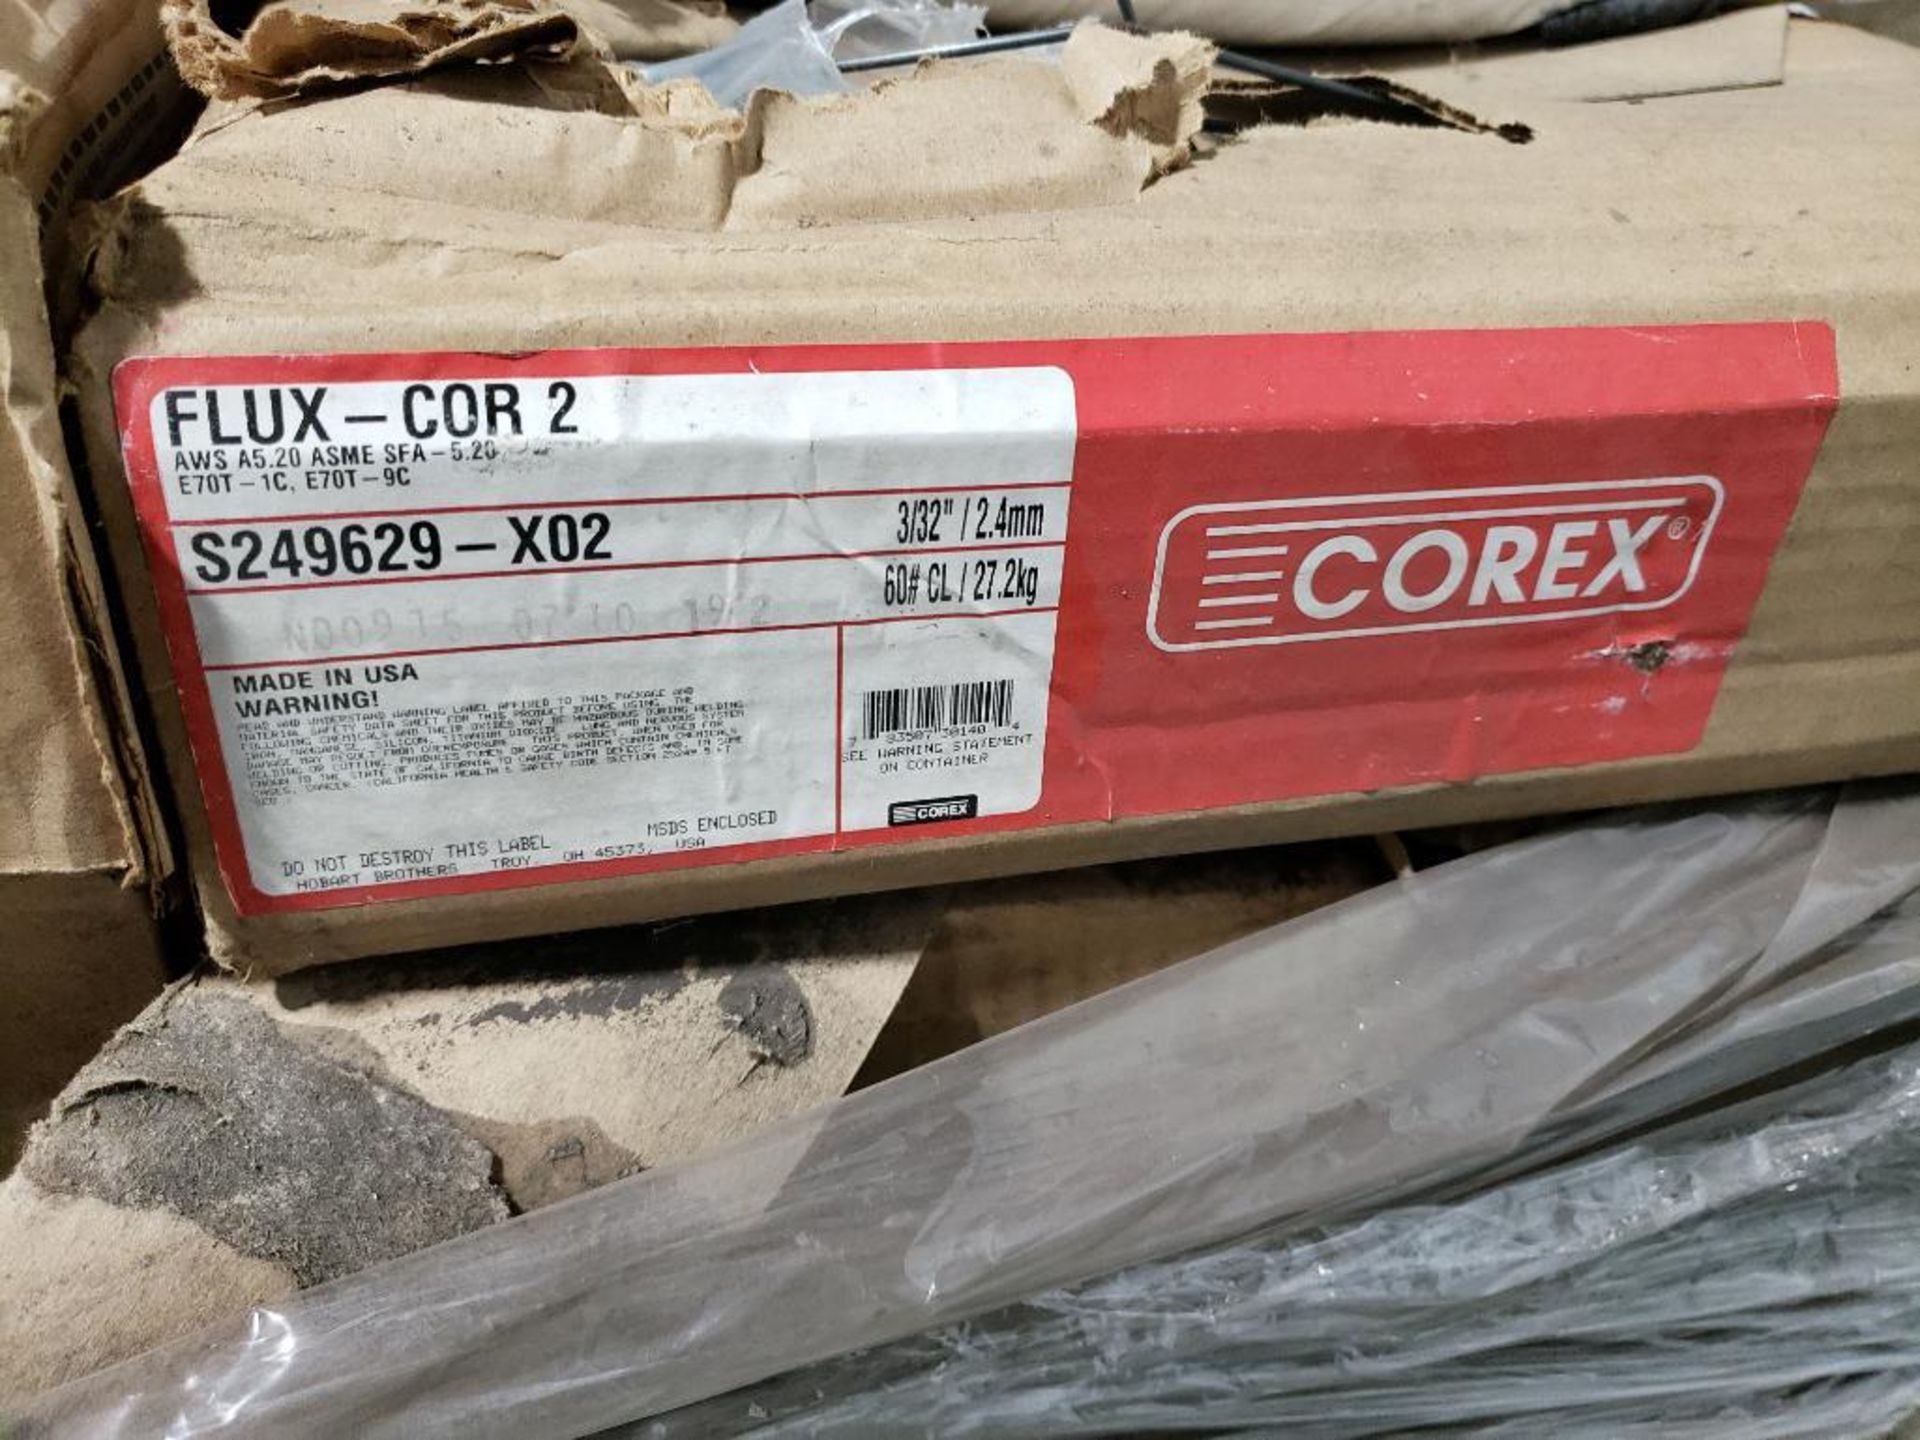 Qty 960lbs - Corex welding wire. Flux-Cor 2, 3/32in. Part number S249629-X02. (16 rolls of 60lbs ea) - Image 2 of 4